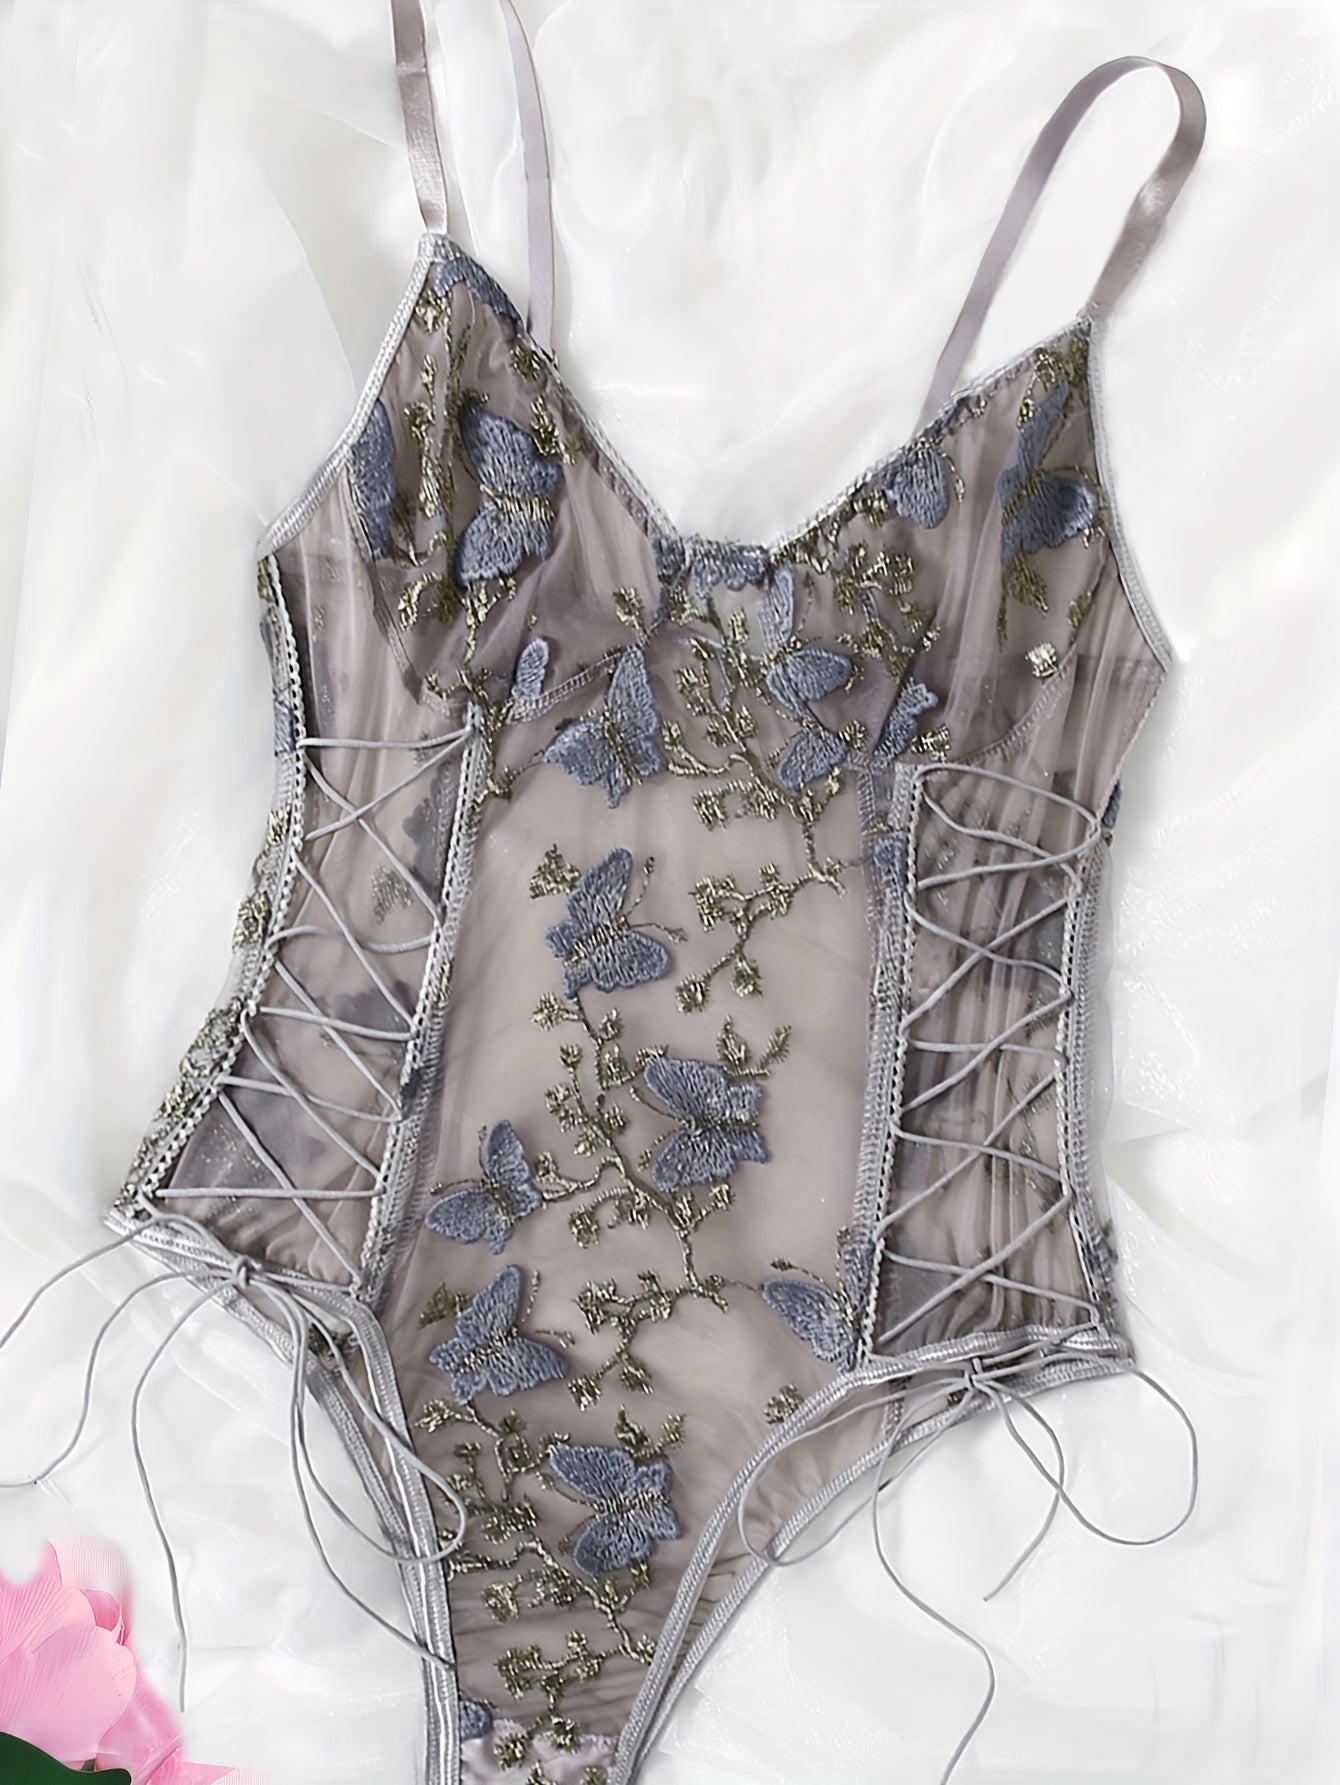 Intimate butterfly embroidered strappy teddy bodysuit - Alluring deep V backless, sheer mesh, feminine lingerie for captivating charm - Womens sexy underwear